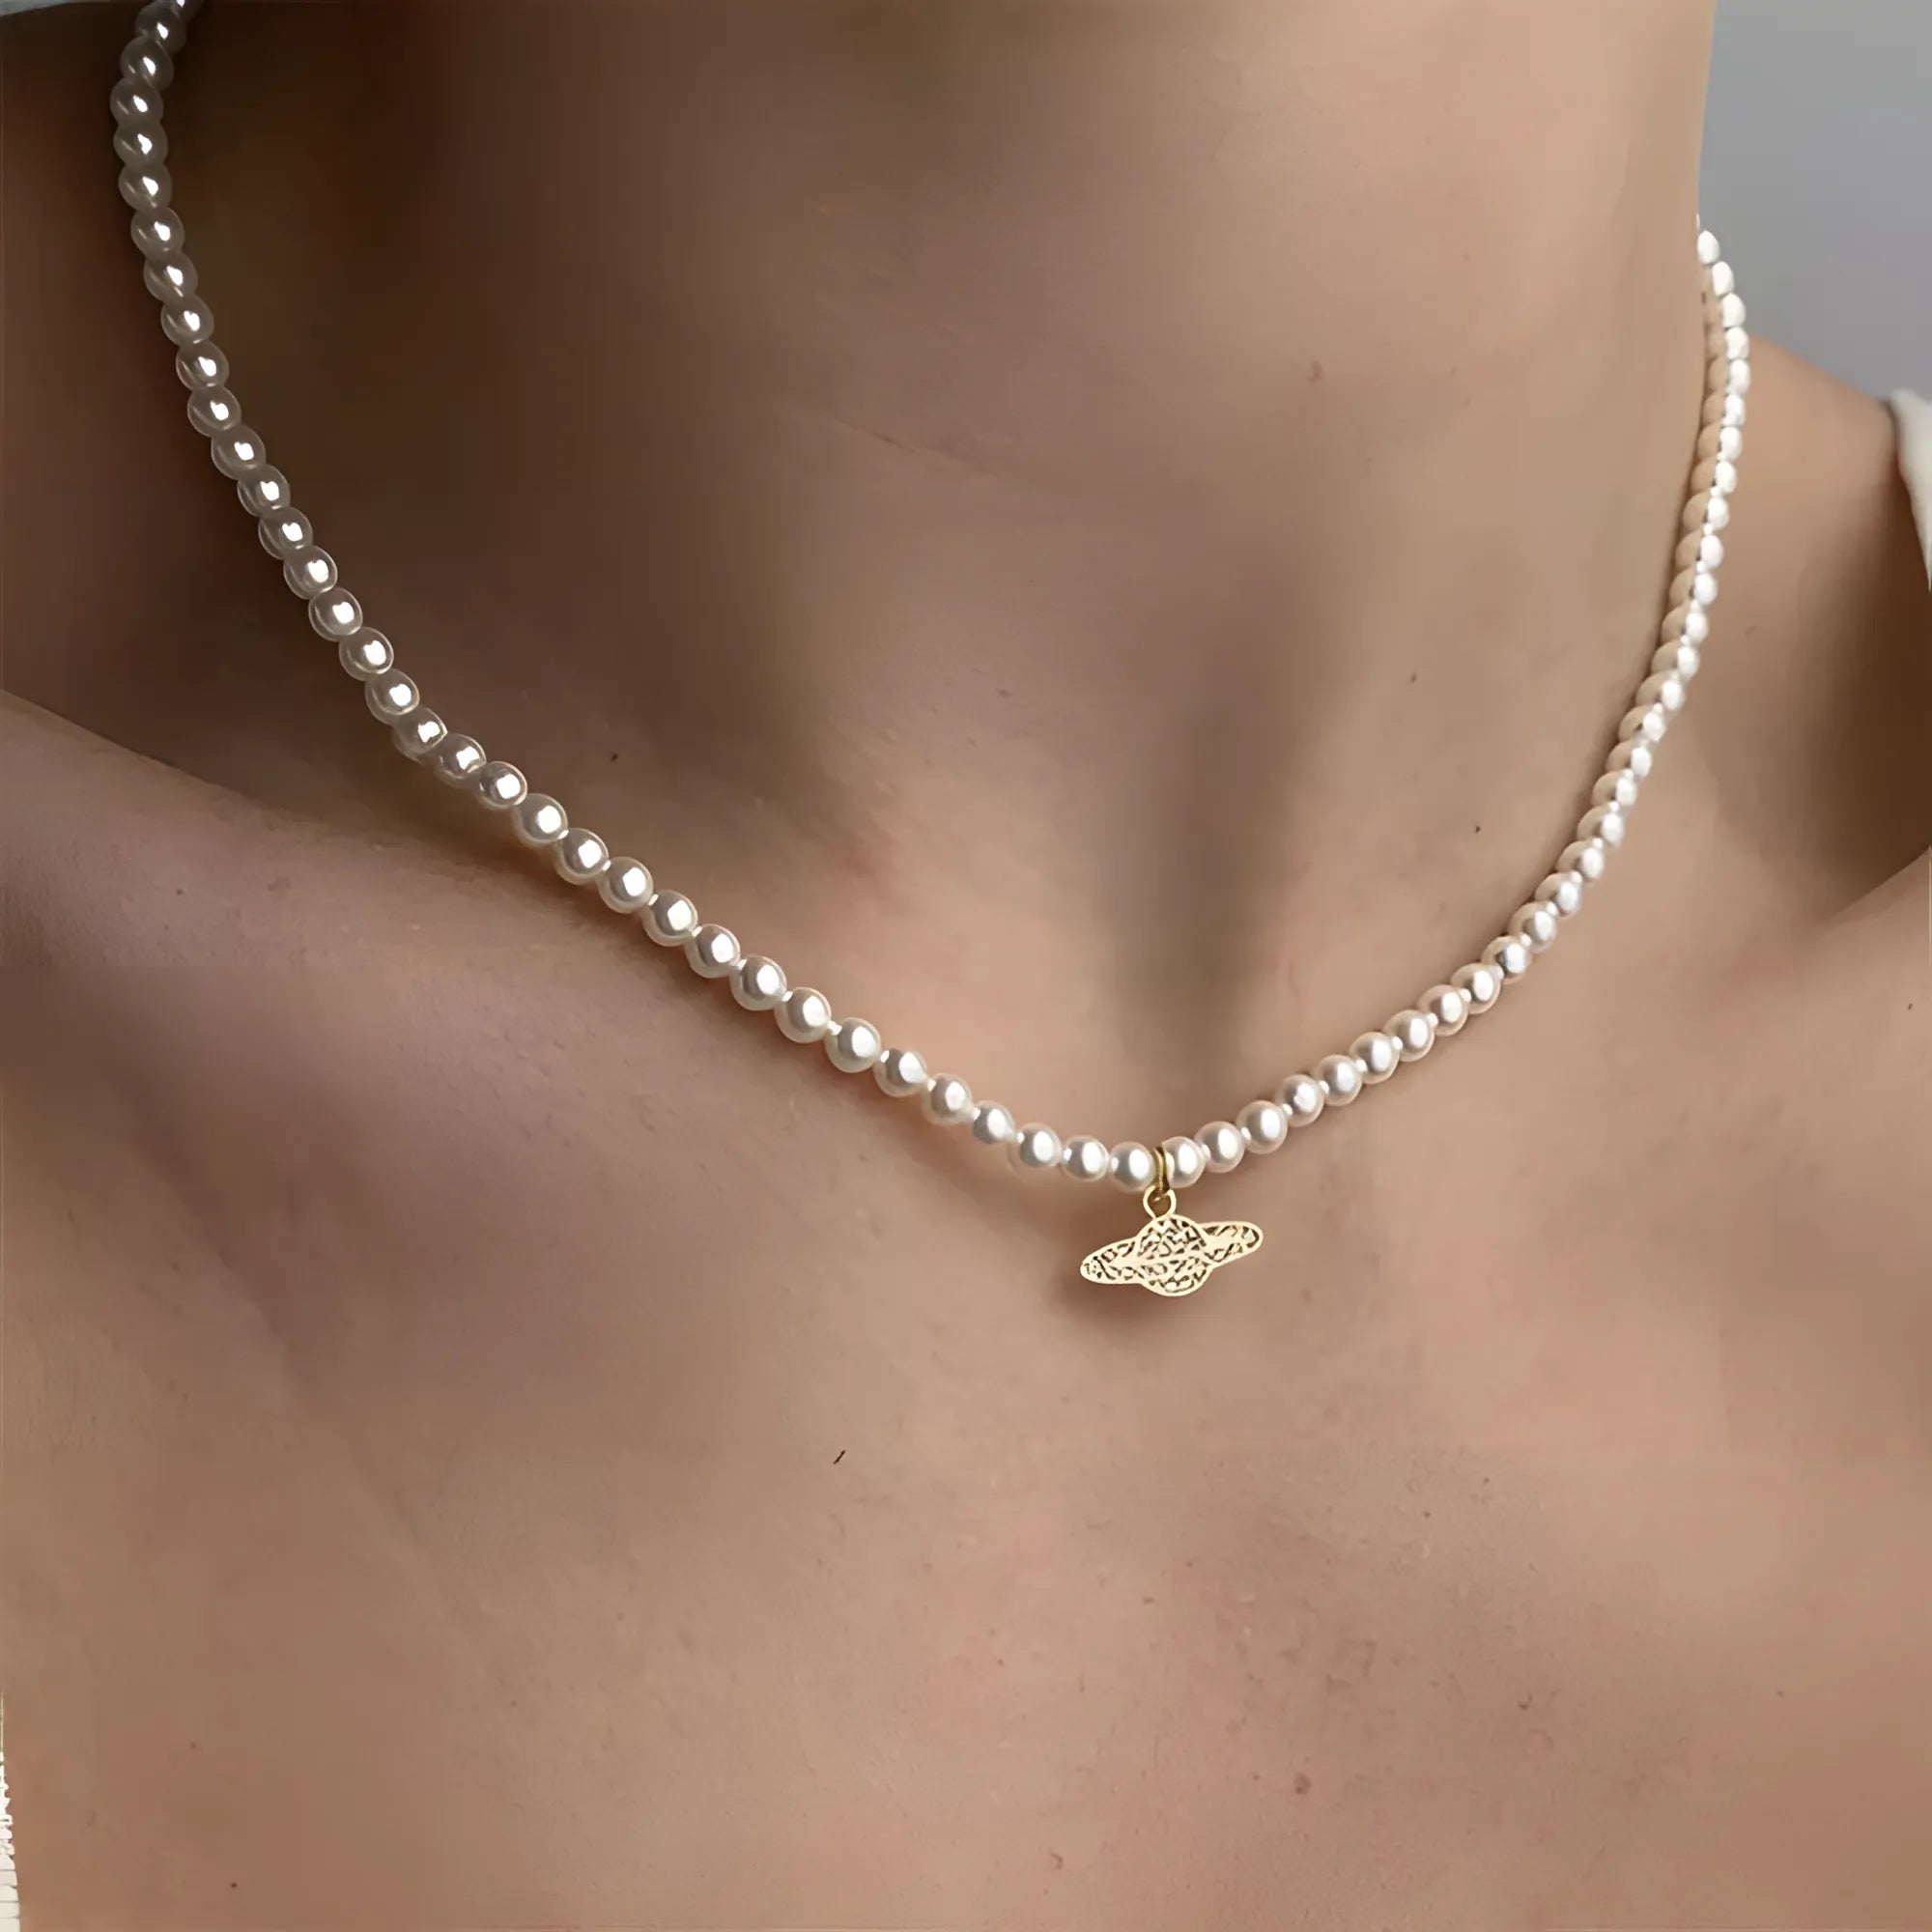 This Bloody Pearl Necklace Will Make You Feel Like a Vampire